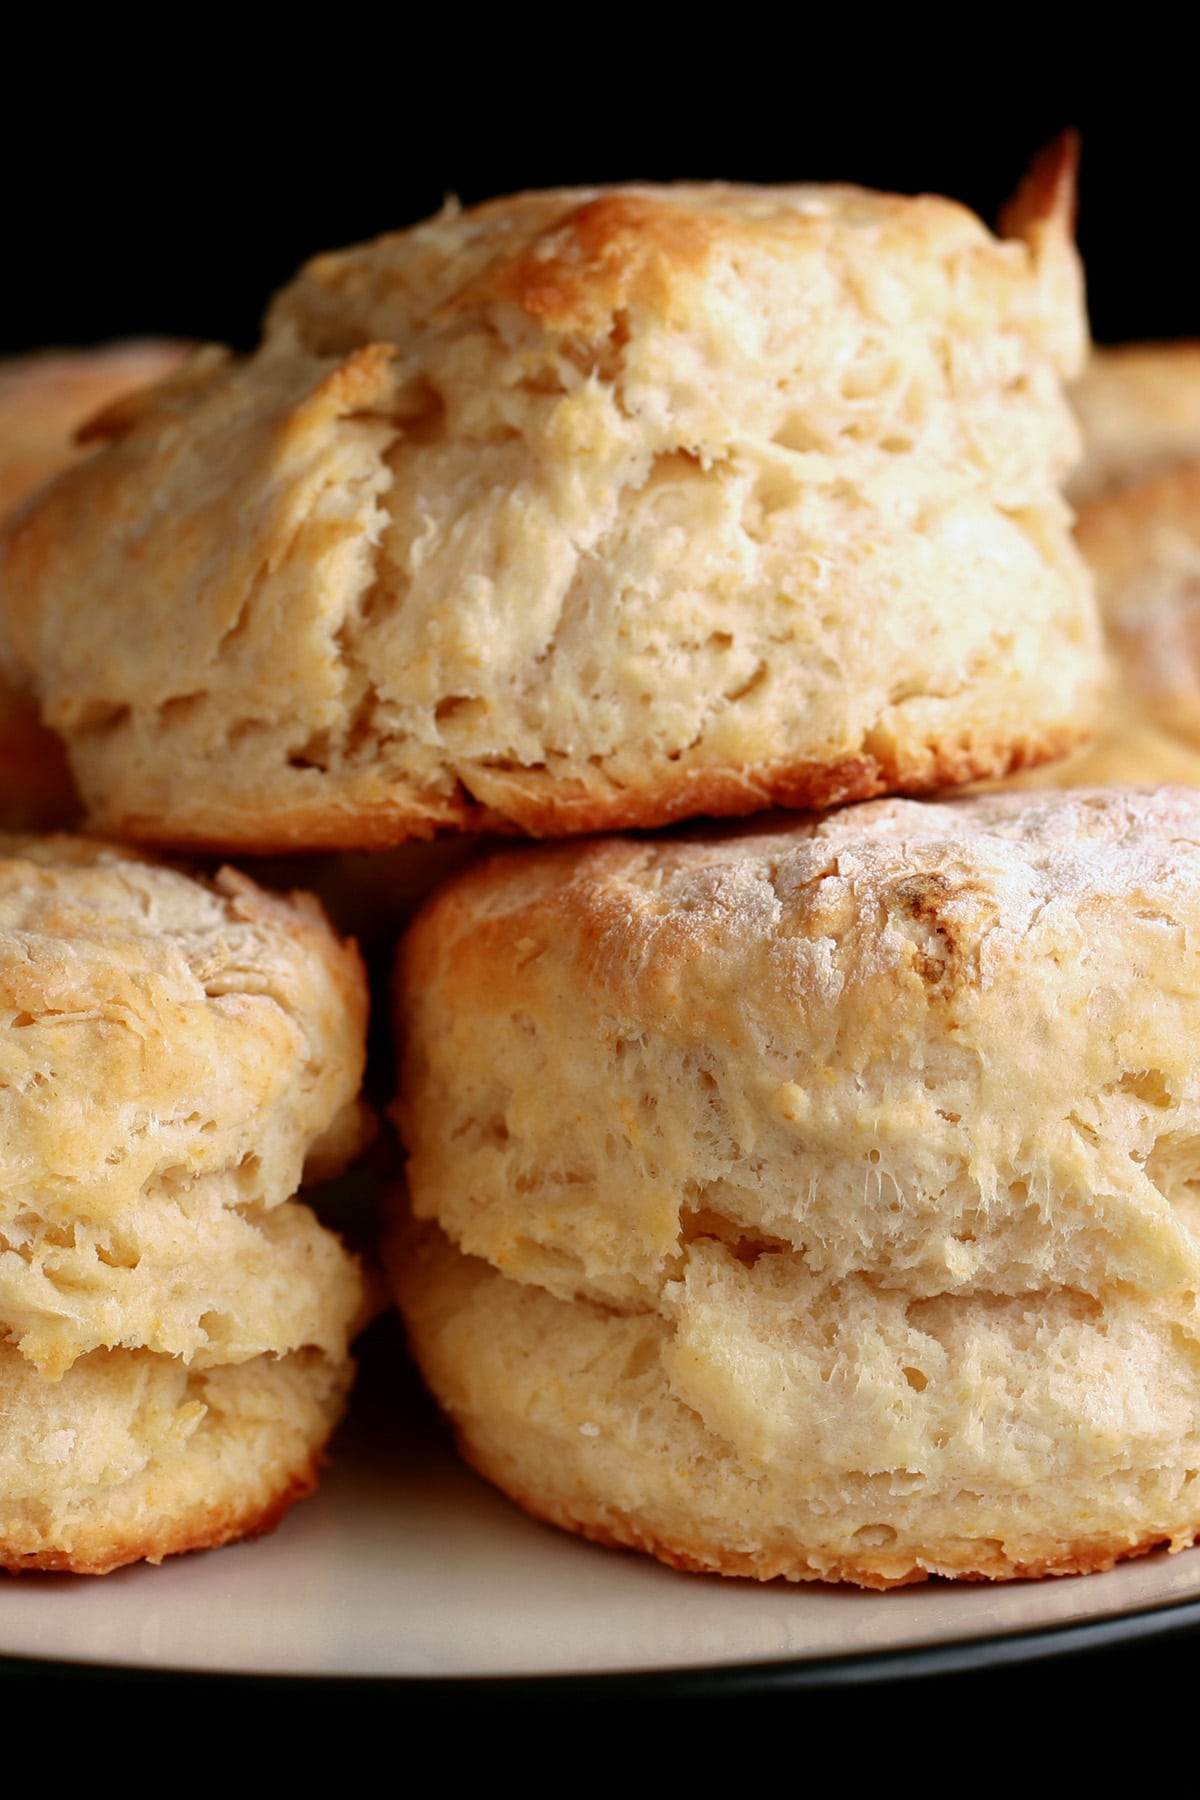 A close up view of several golden baking powder buttermilk biscuits on a plate.